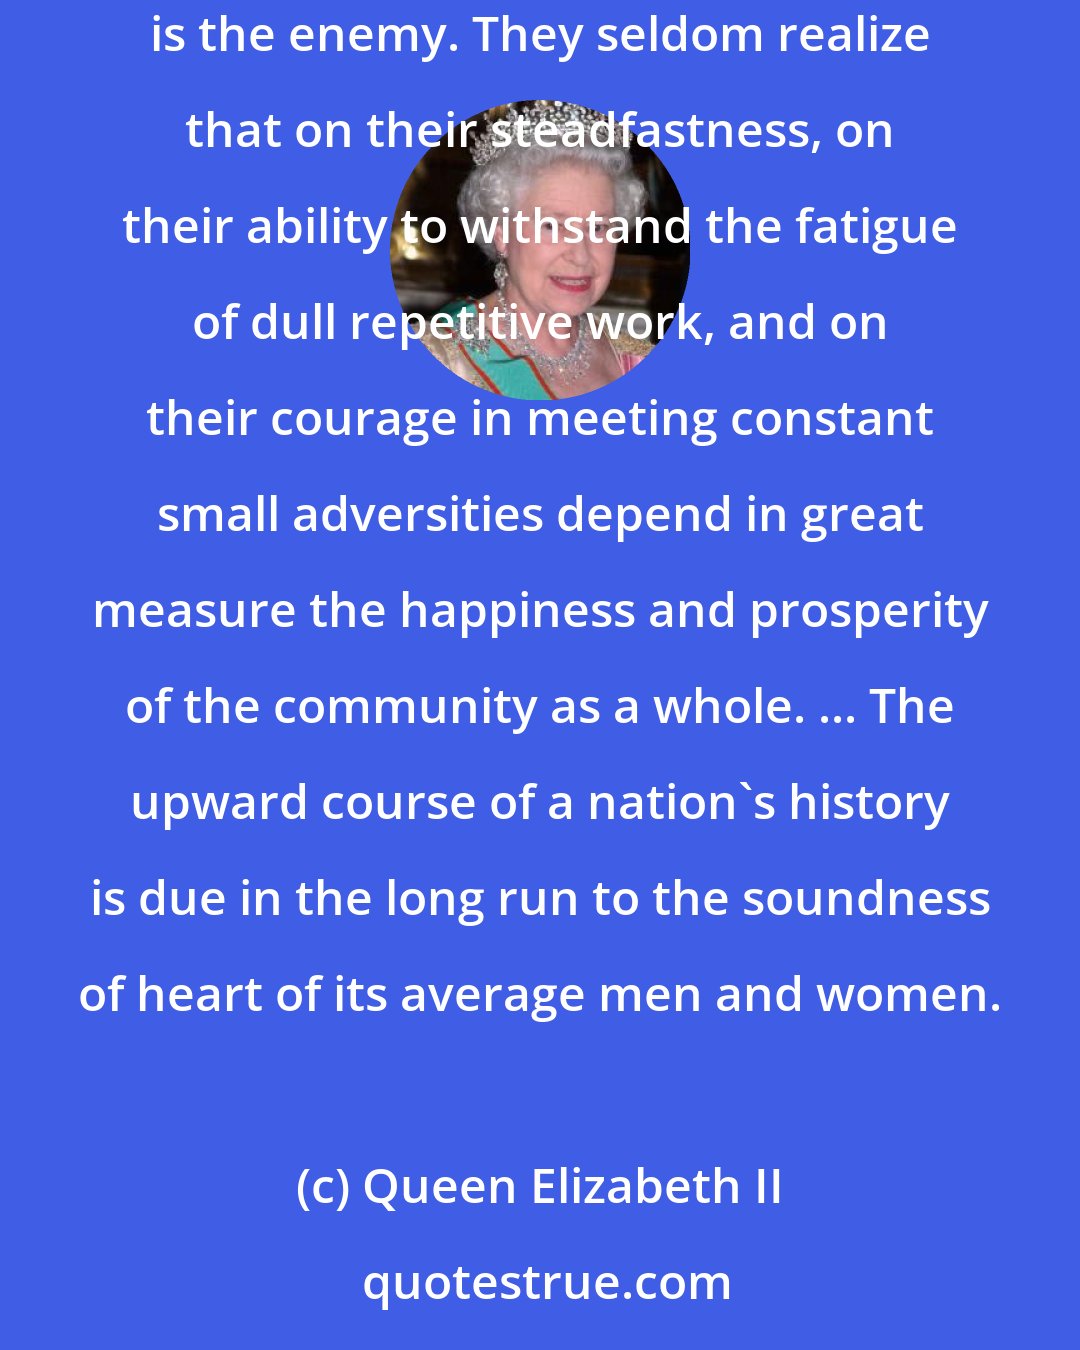 Queen Elizabeth II: In the turbulence of this anxious and active world many people are leading uneventful, lonely lives. To them dreariness, not disaster, is the enemy. They seldom realize that on their steadfastness, on their ability to withstand the fatigue of dull repetitive work, and on their courage in meeting constant small adversities depend in great measure the happiness and prosperity of the community as a whole. ... The upward course of a nation's history is due in the long run to the soundness of heart of its average men and women.